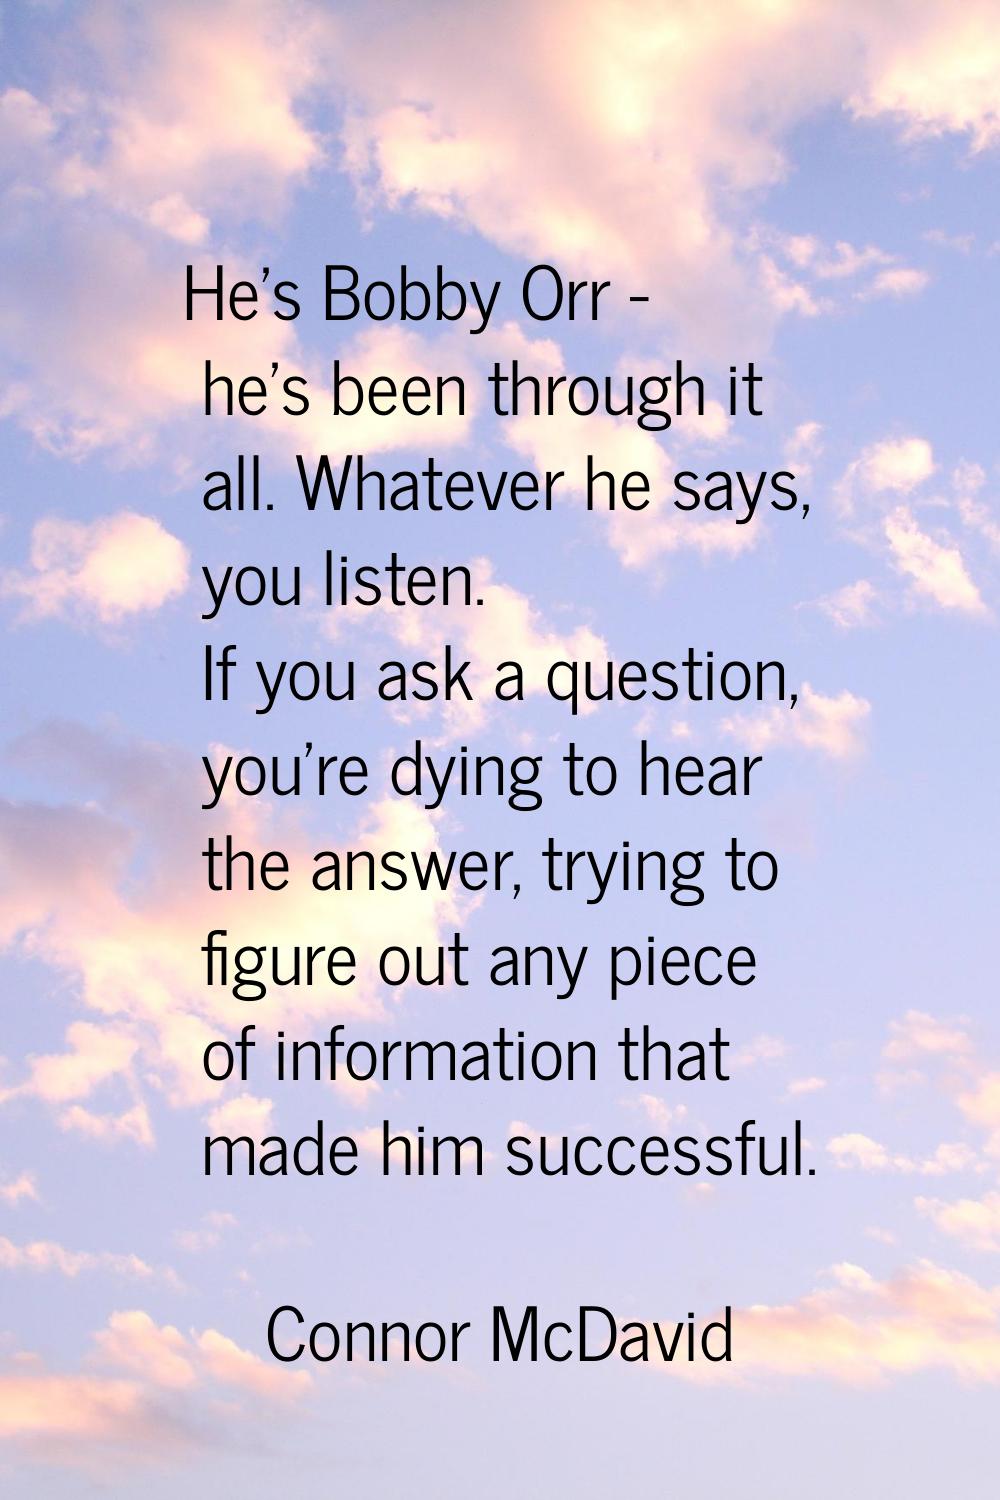 He's Bobby Orr - he's been through it all. Whatever he says, you listen. If you ask a question, you